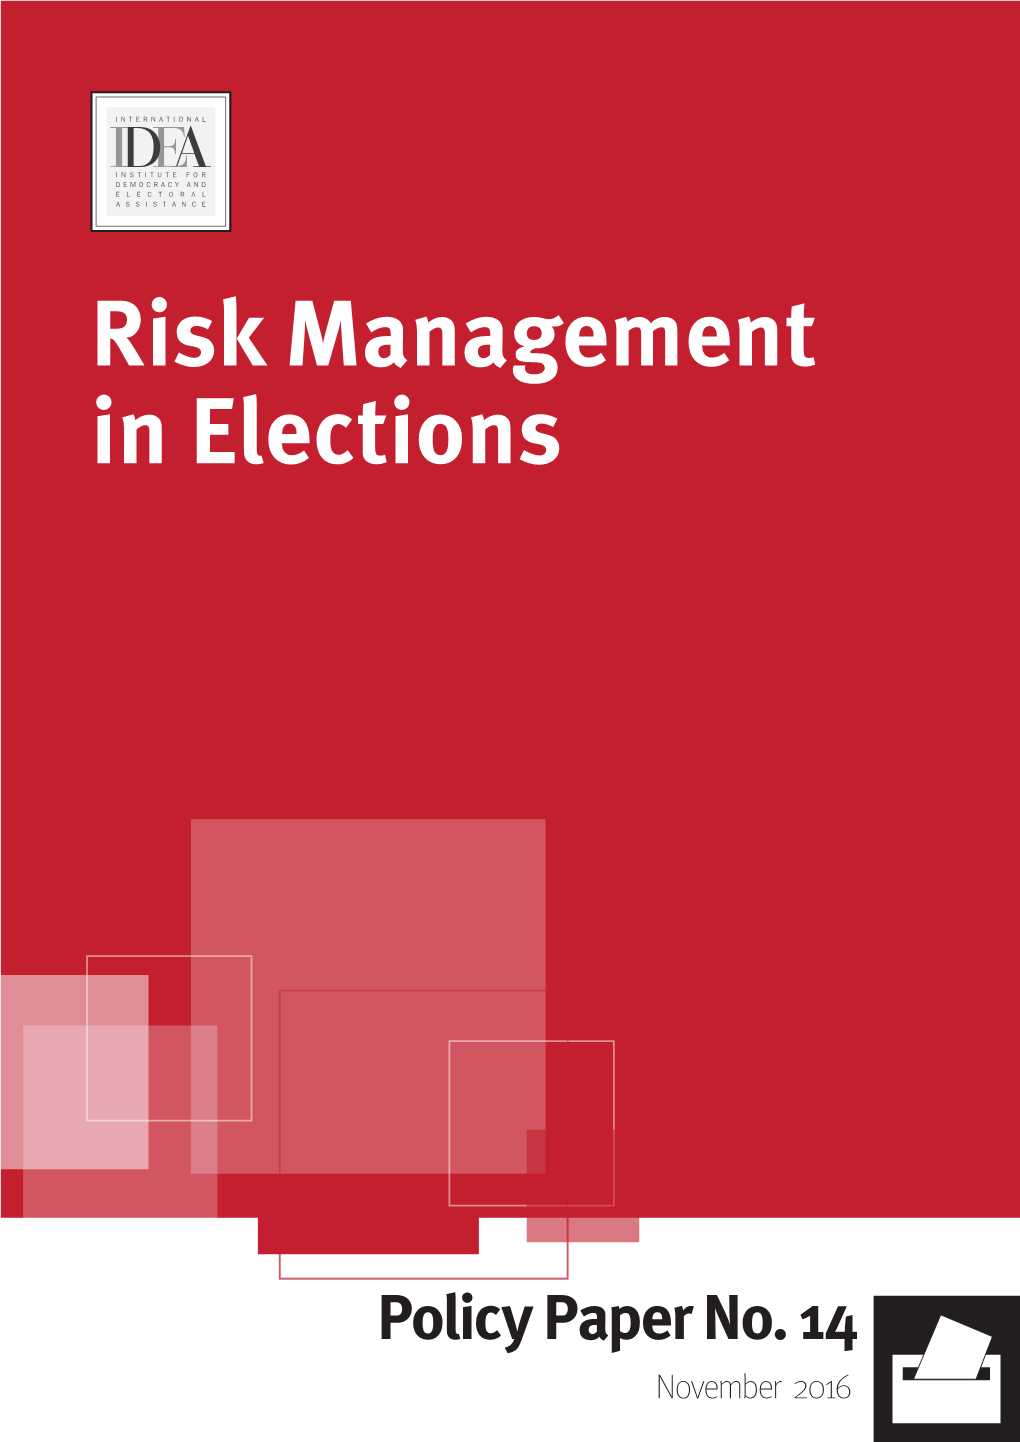 Risk Management in Elections